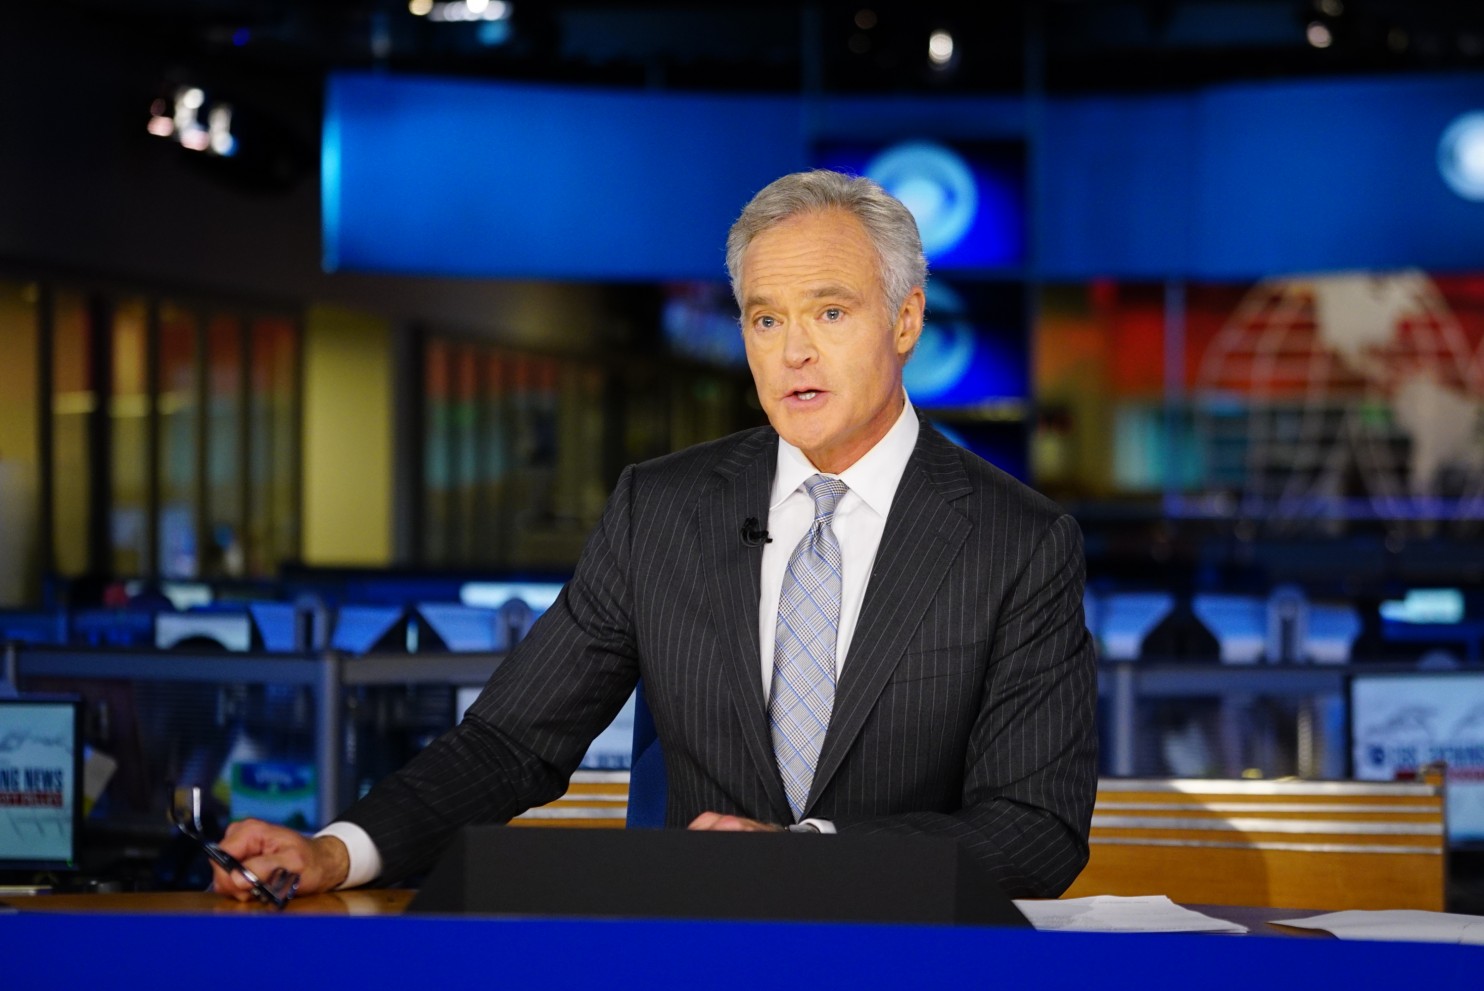 Scott Pelley is pulling no punches on the nightly news - and